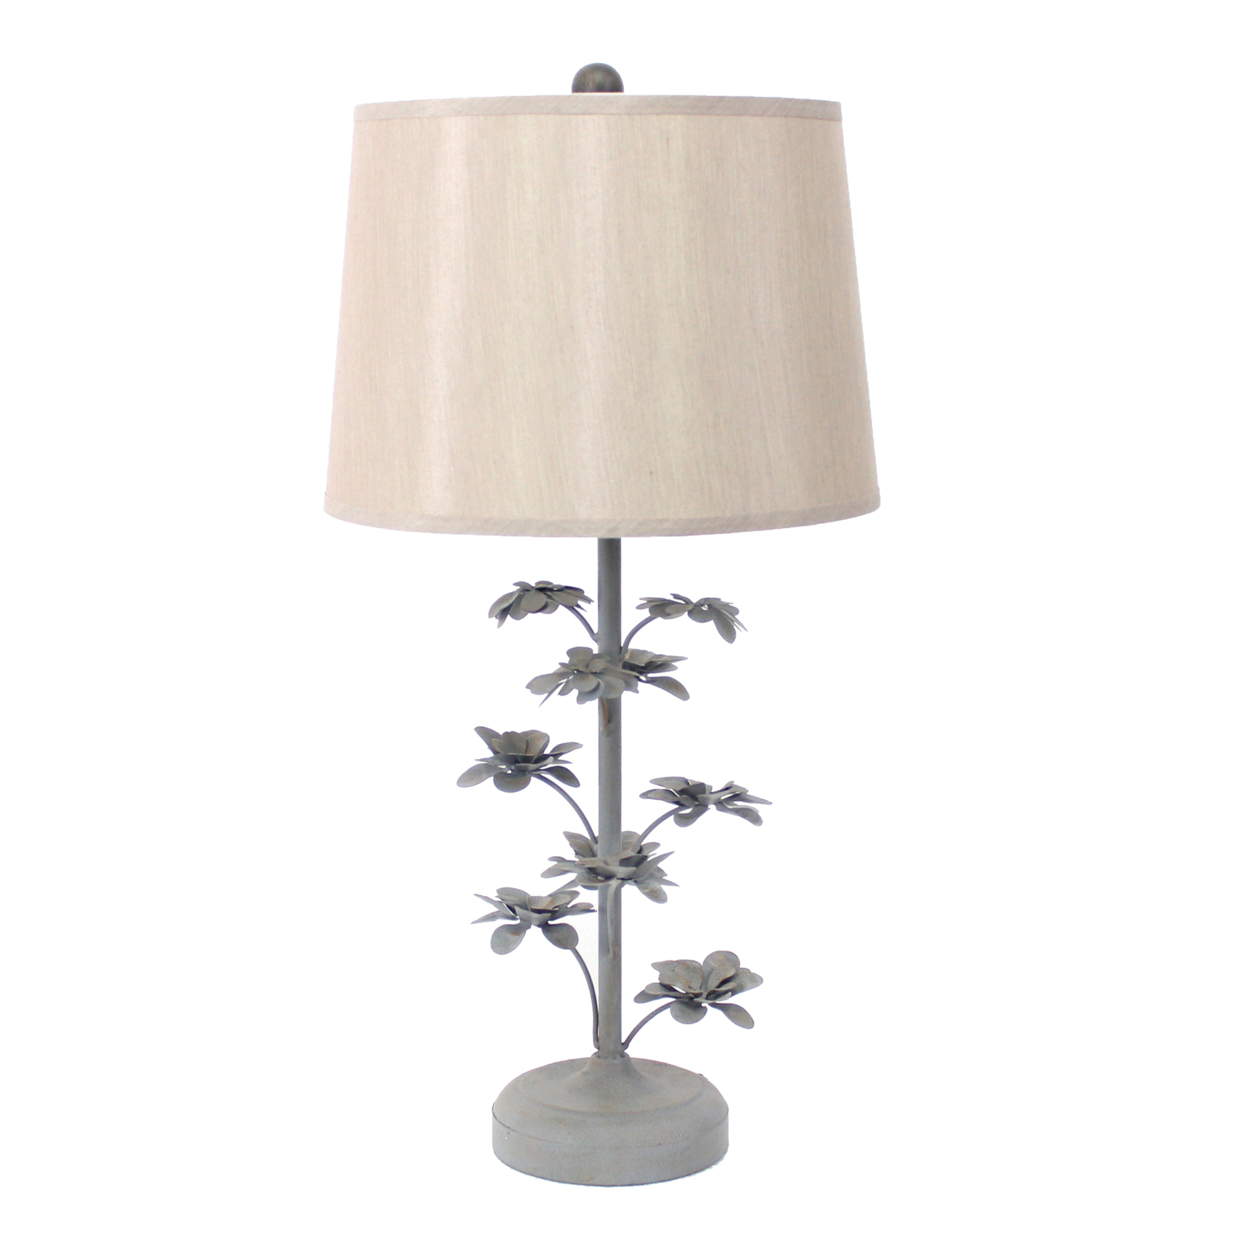 Flower Tree Design Metal Table Lamp With Tapered Drum Shade, Gray And Beige- Saltoro Sherpi